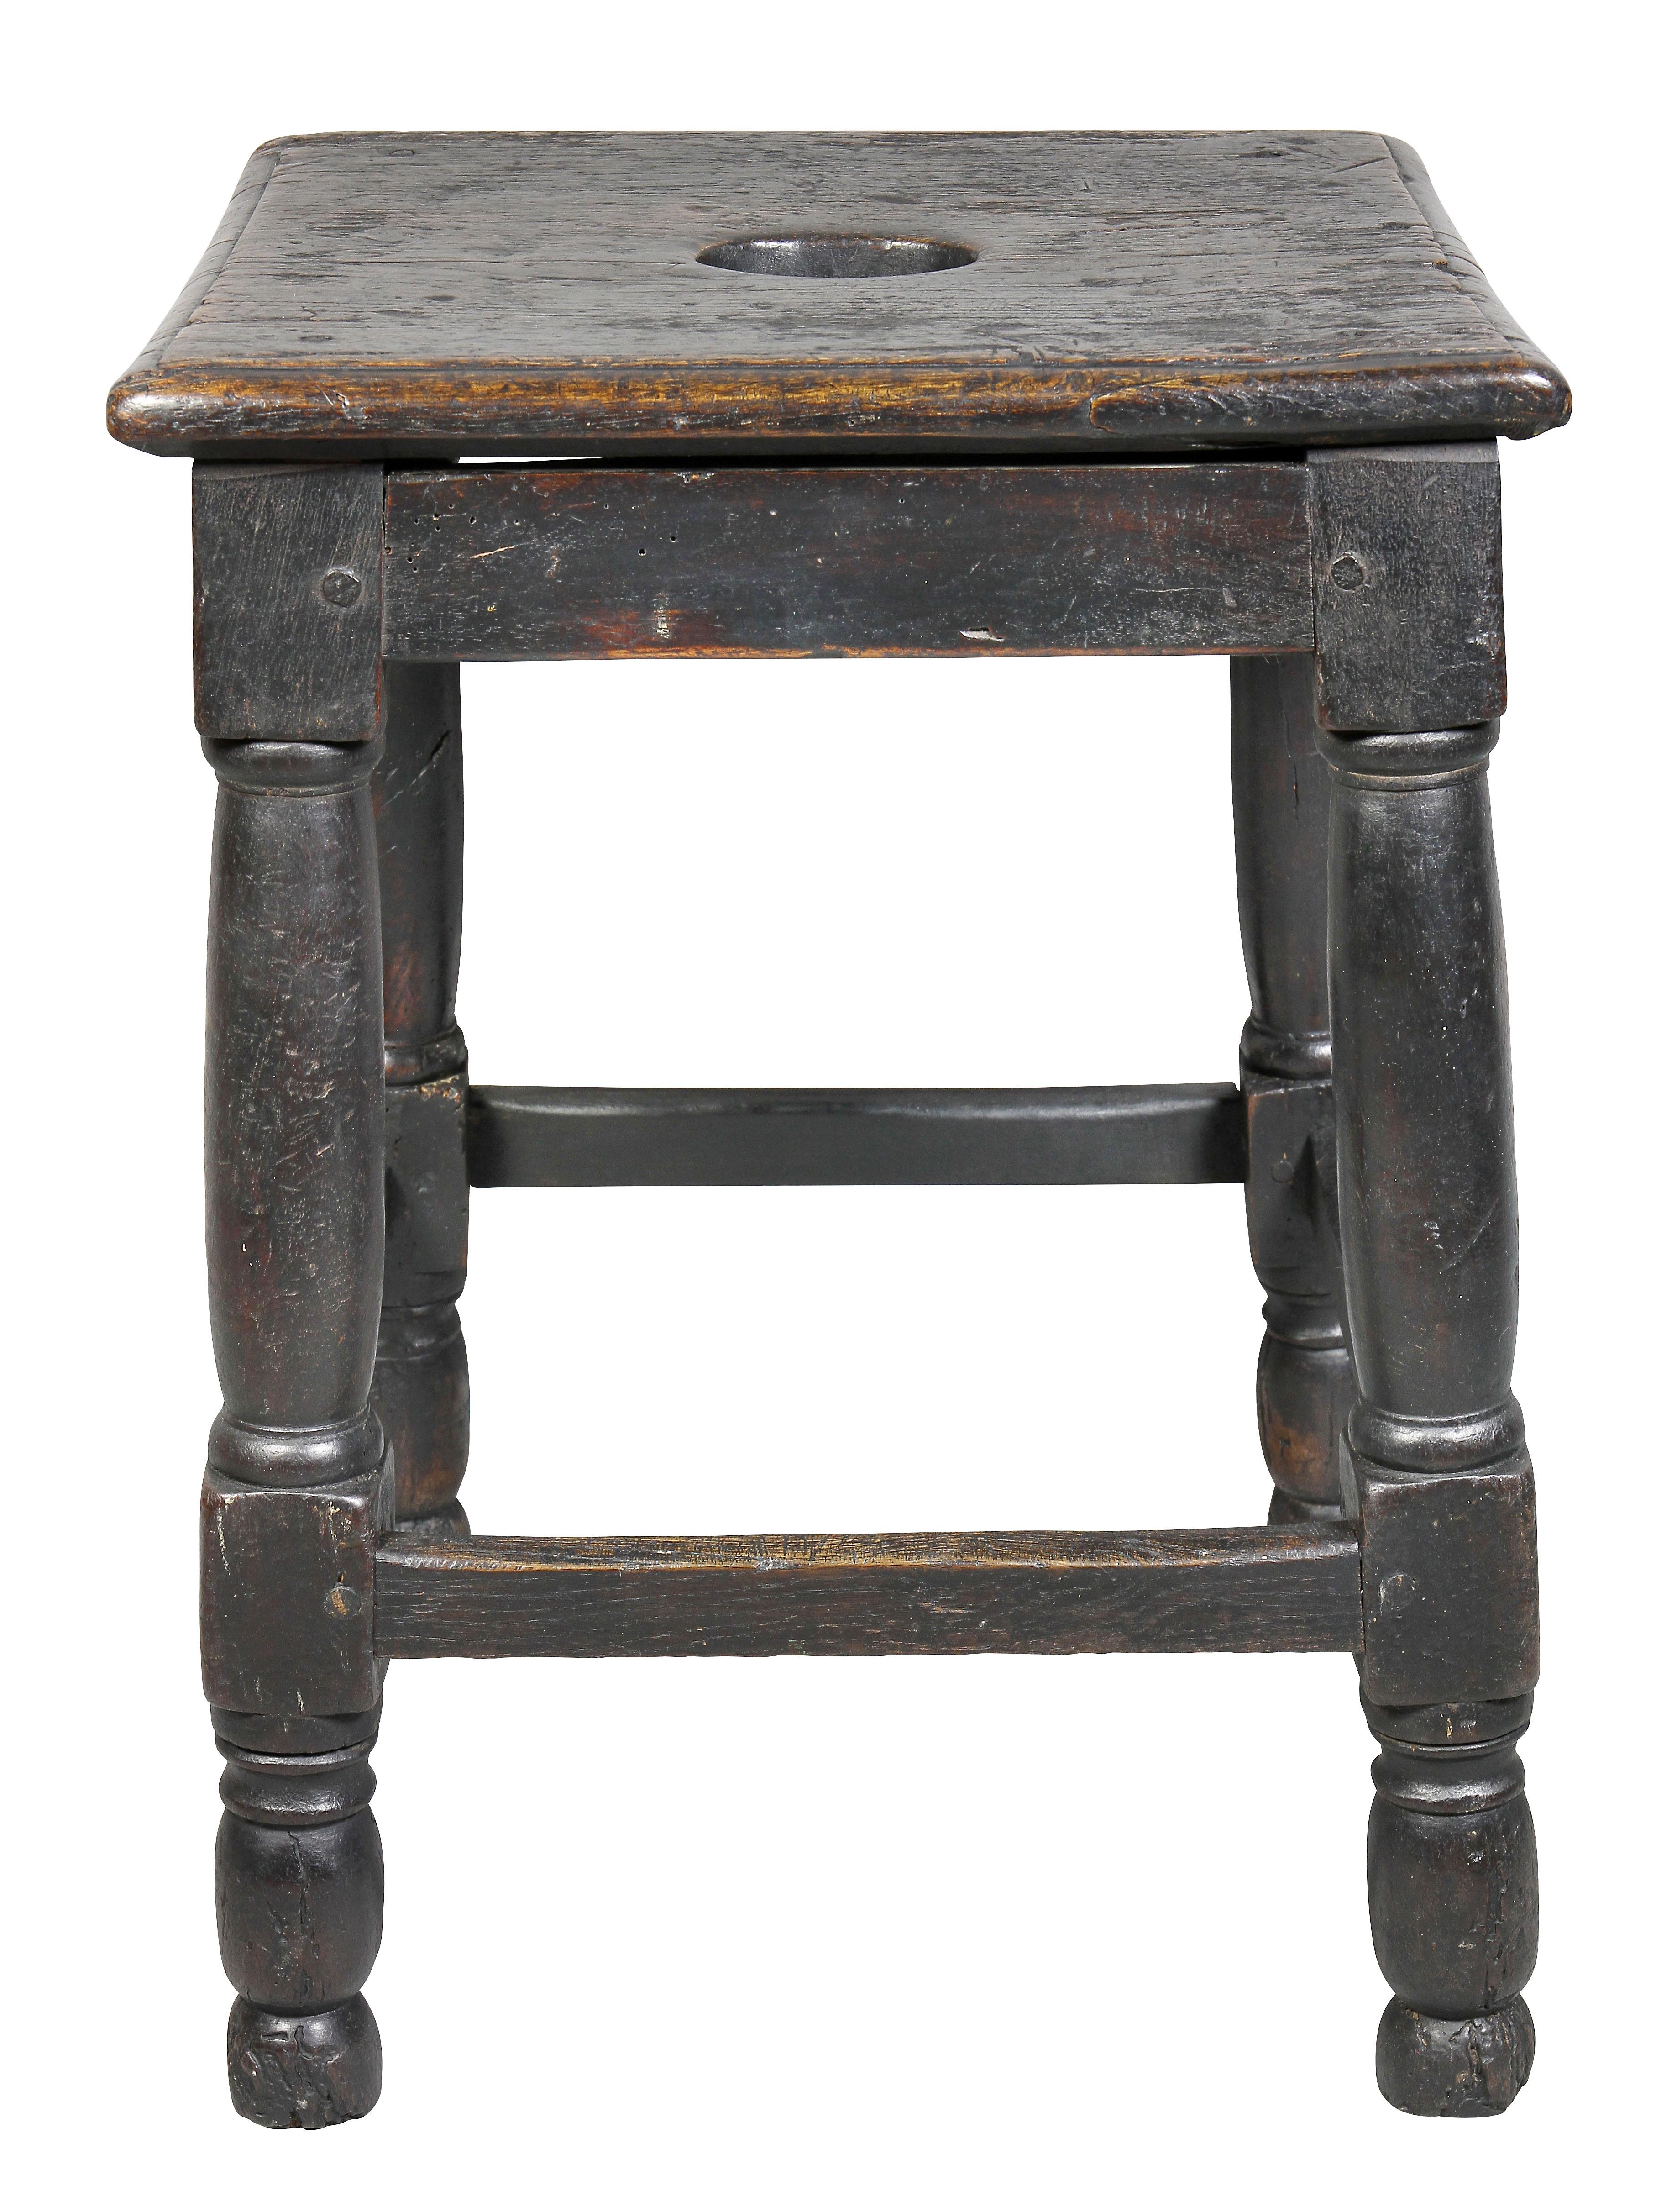 Almost square top with hand cutout over a simple frieze, raised on turned legs and joined by a box stretcher. W. Hodgins Estate.